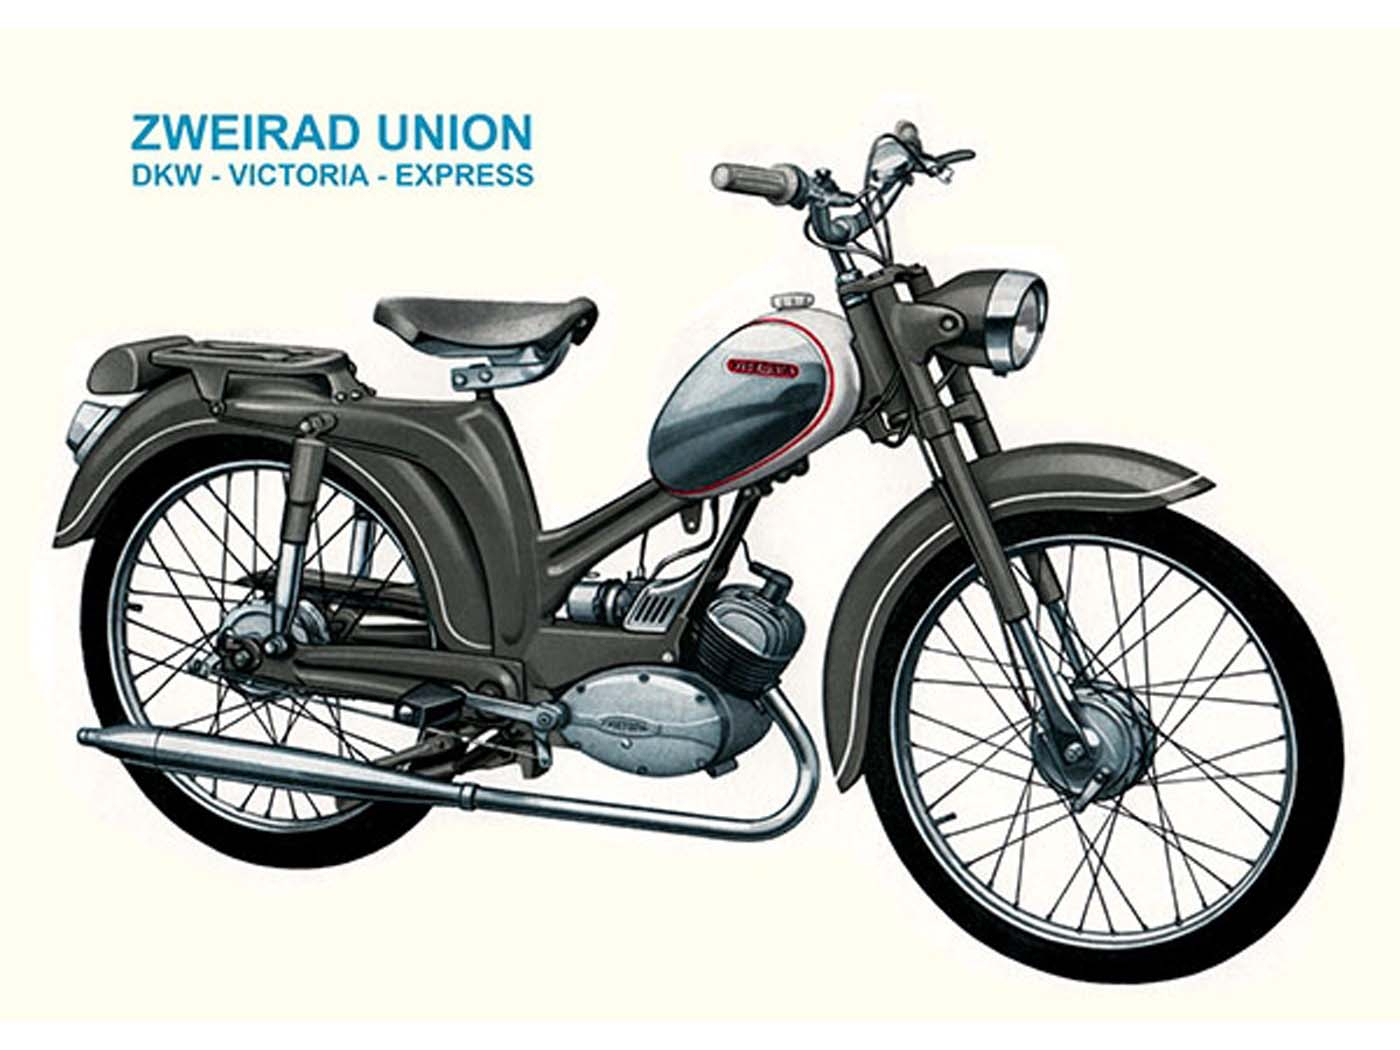 Advertising Poster For Zweirad Union DKW Victoria Express Type 110 50s